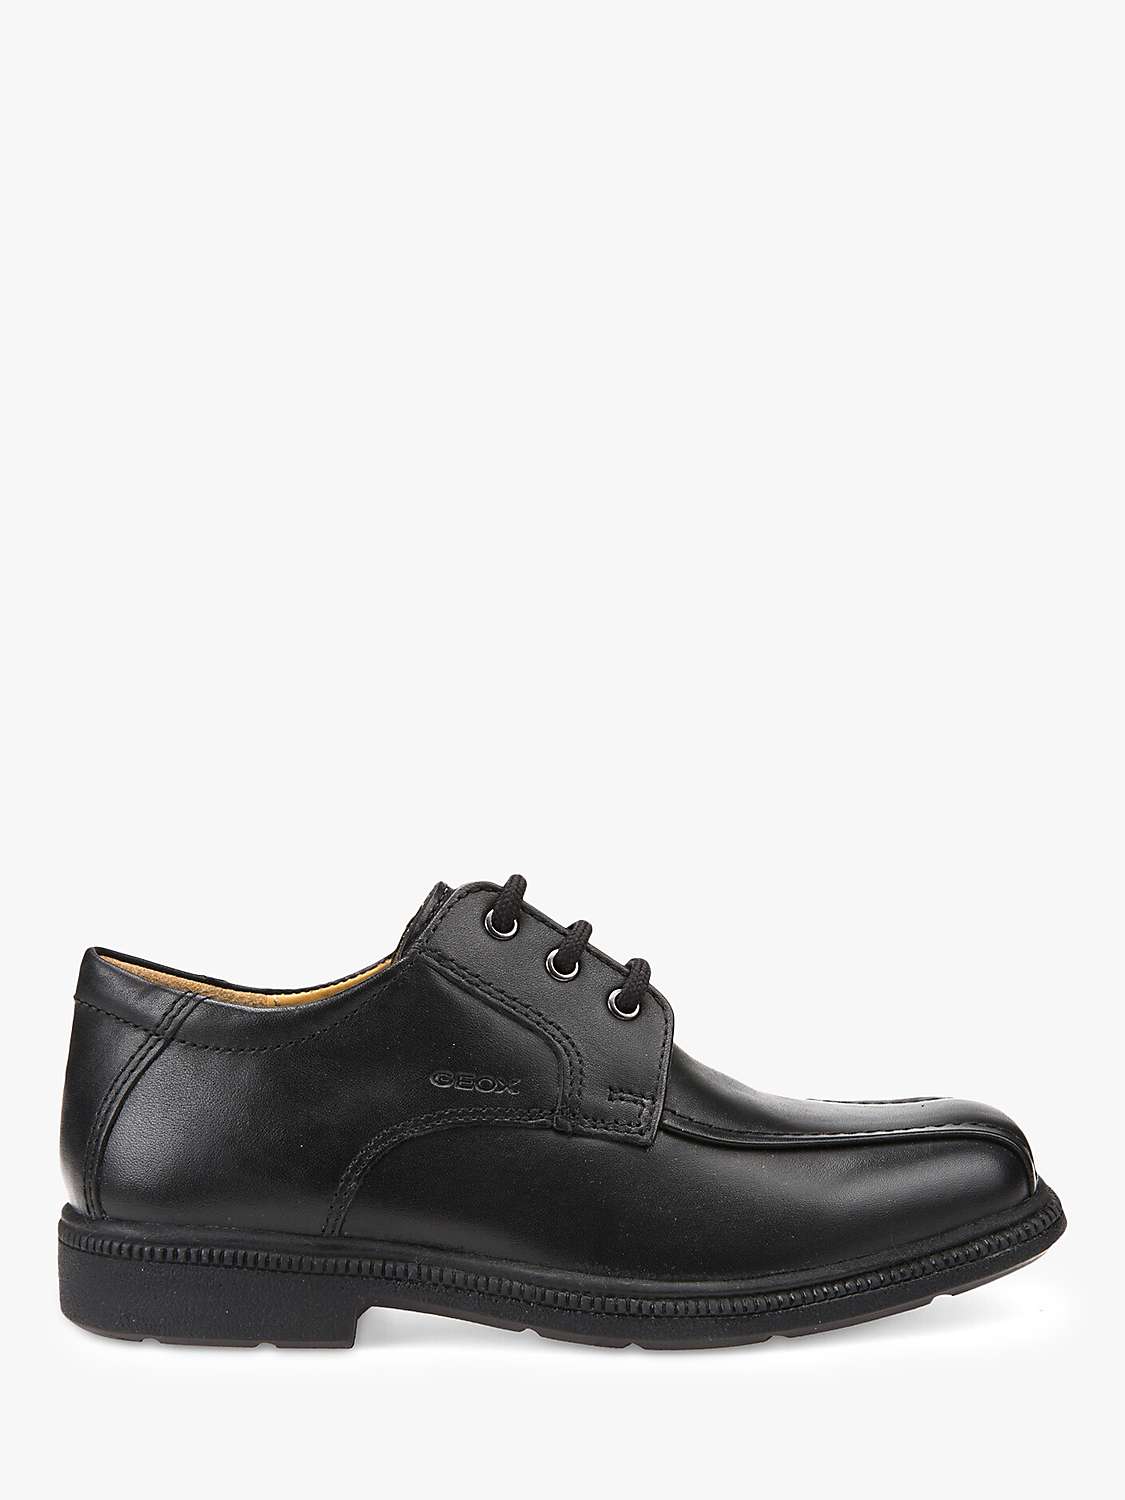 Buy Geox Kids' J Federico Lace Shoes, Black Online at johnlewis.com